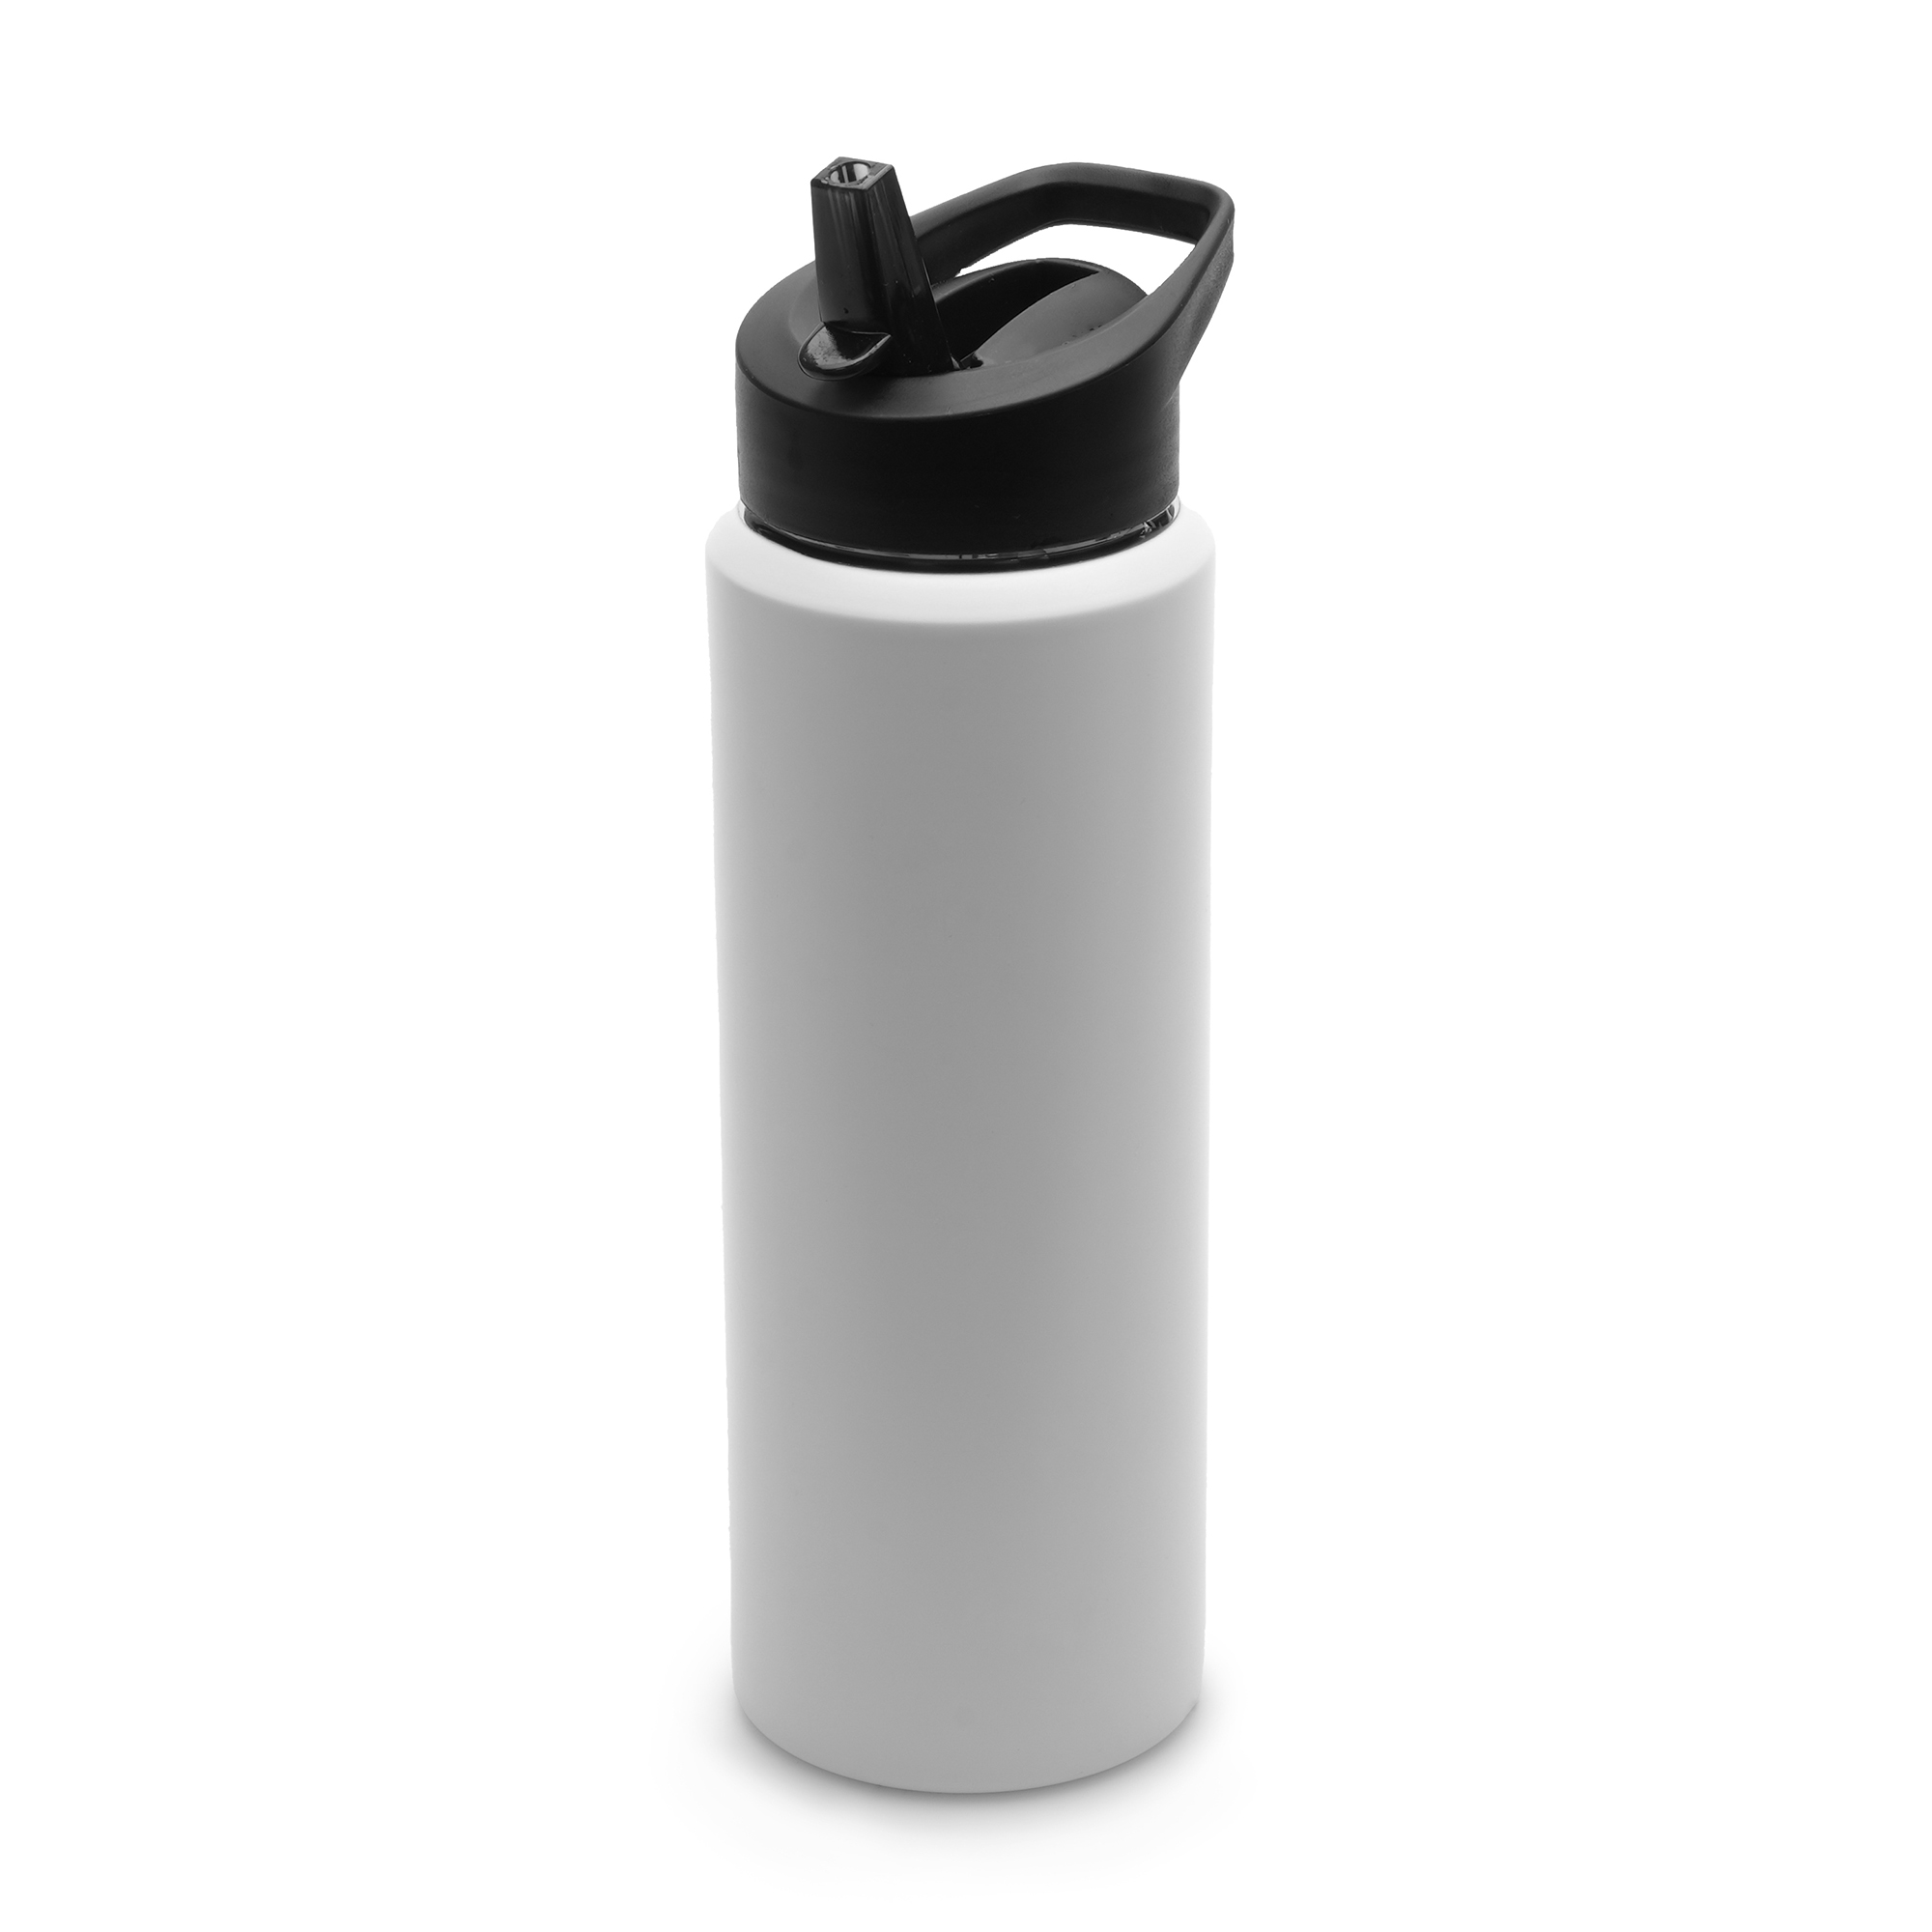 750ml single walled, stainless steel bottle which changes colour when you add cold liquids. Secured with a screw on recycled PP plastic lid with recycled PS plastic sipper, recycled LDPE plastic straw and silicone seal. BPA and PVC free.